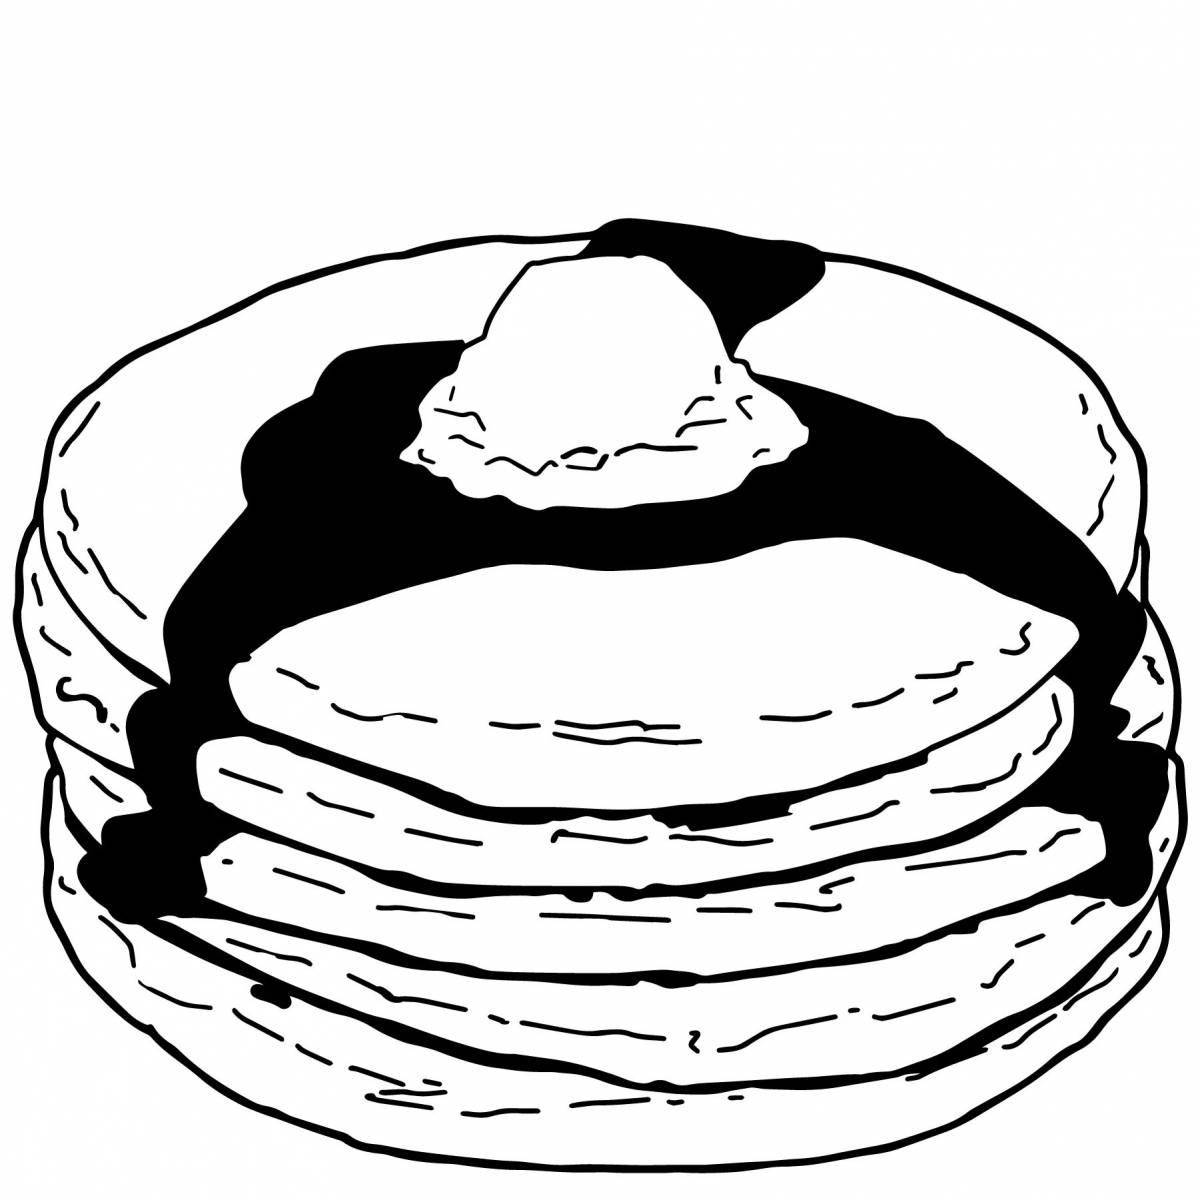 Colourful pancakes coloring book